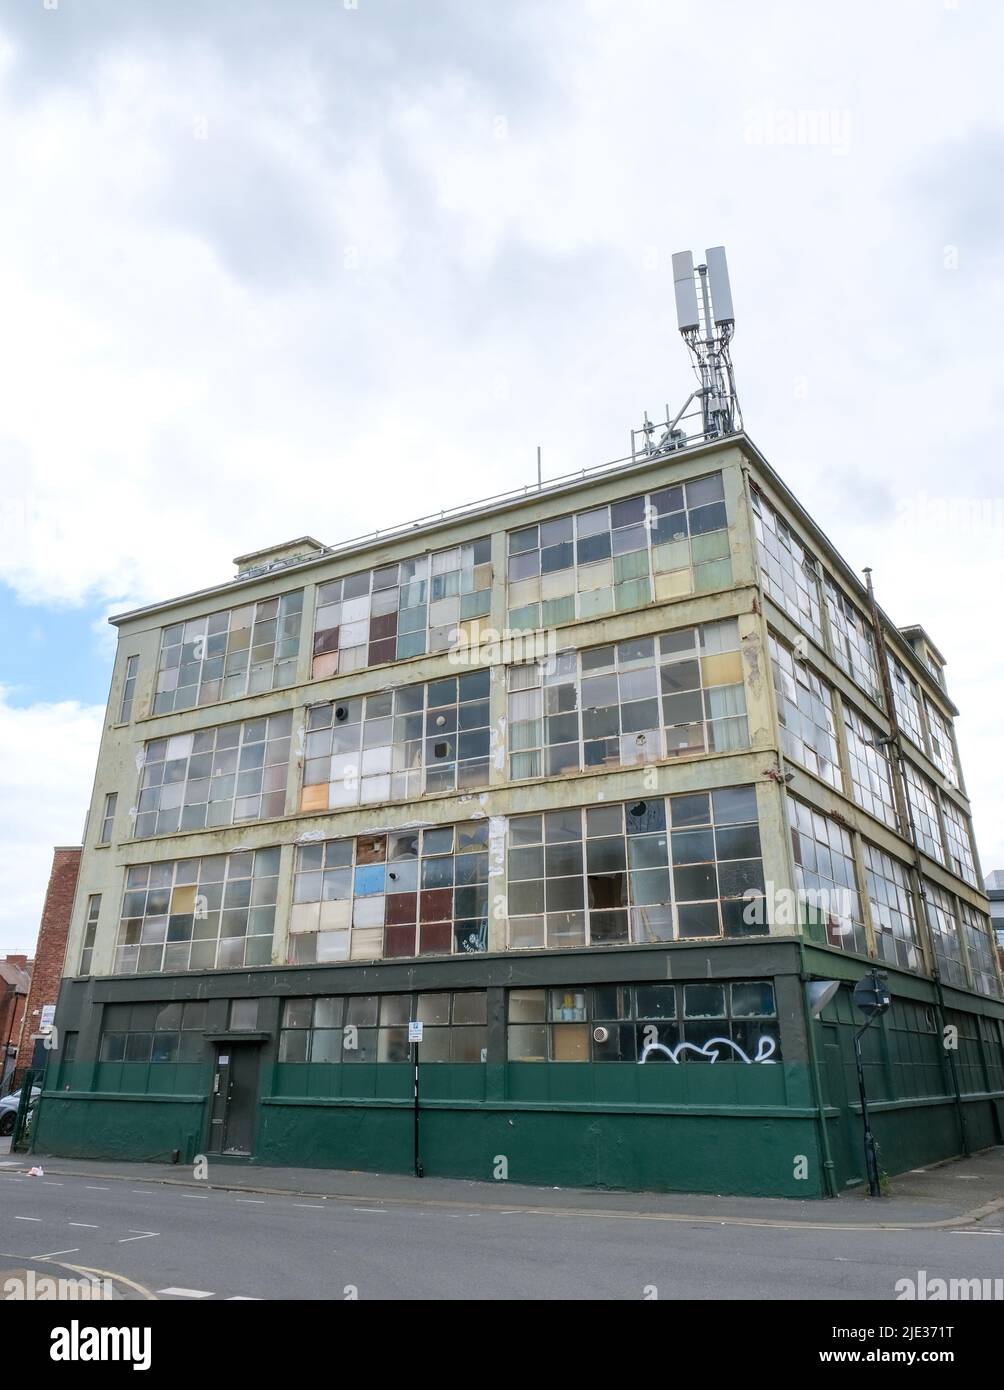 A former semi-derelict industrial building in an inner city area of Sheffield built with a geometric patterning of glass and steel. Stock Photo